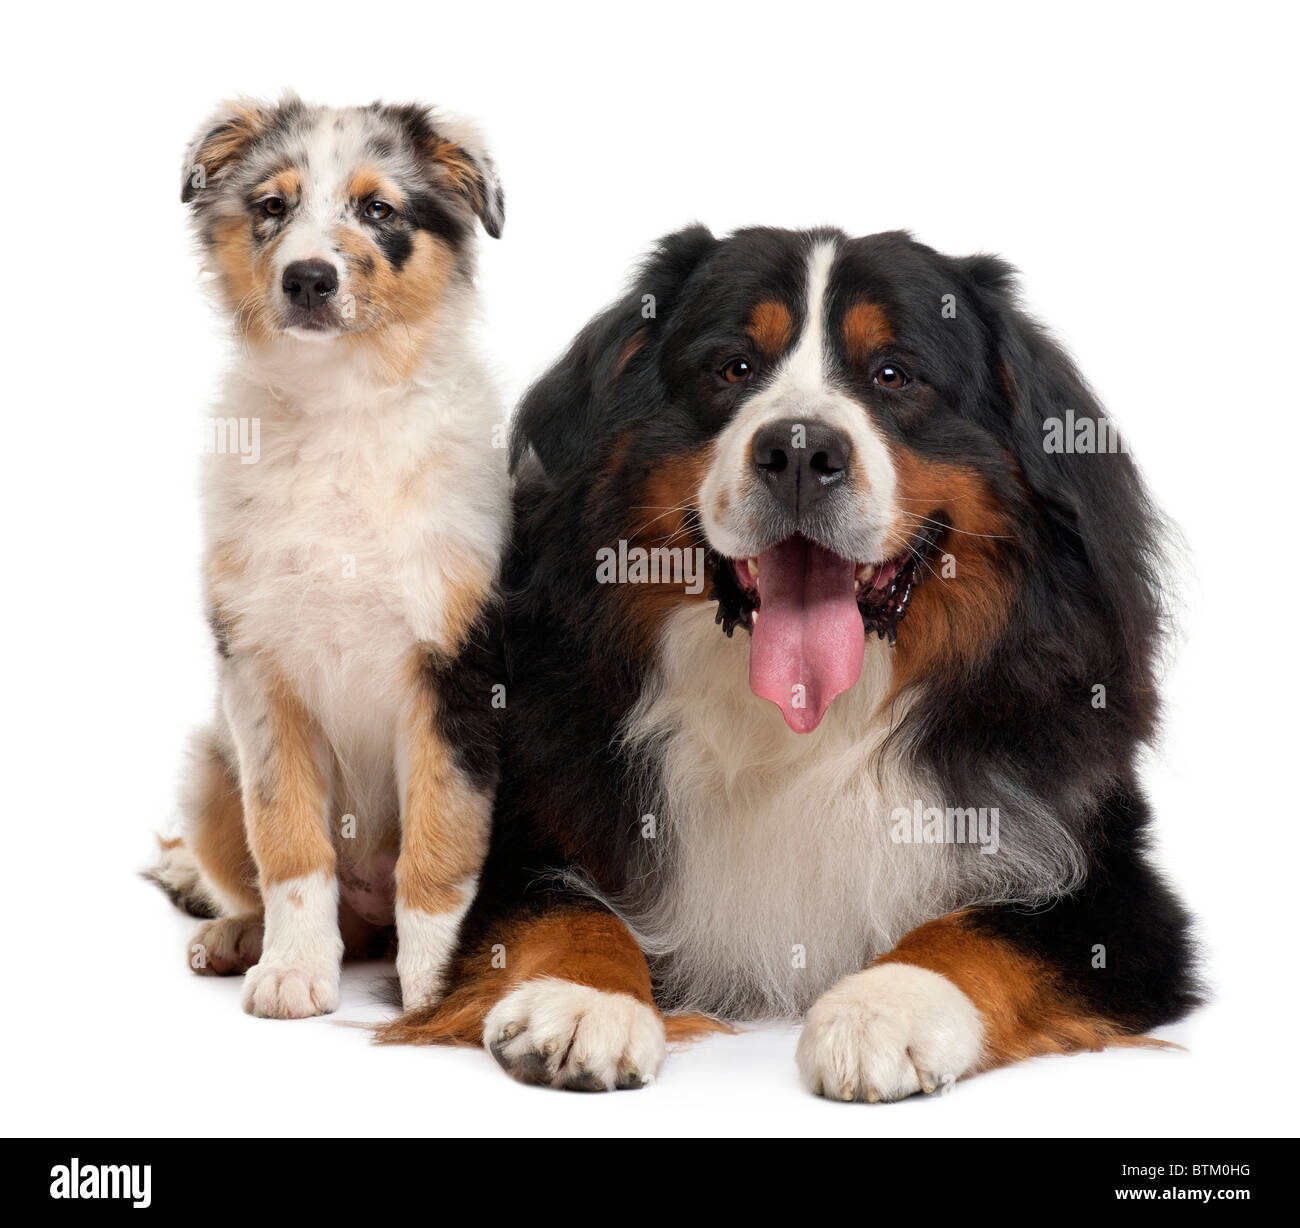 Bernese mountain dogs, 3 years old, sitting in front of white background Stock Photo